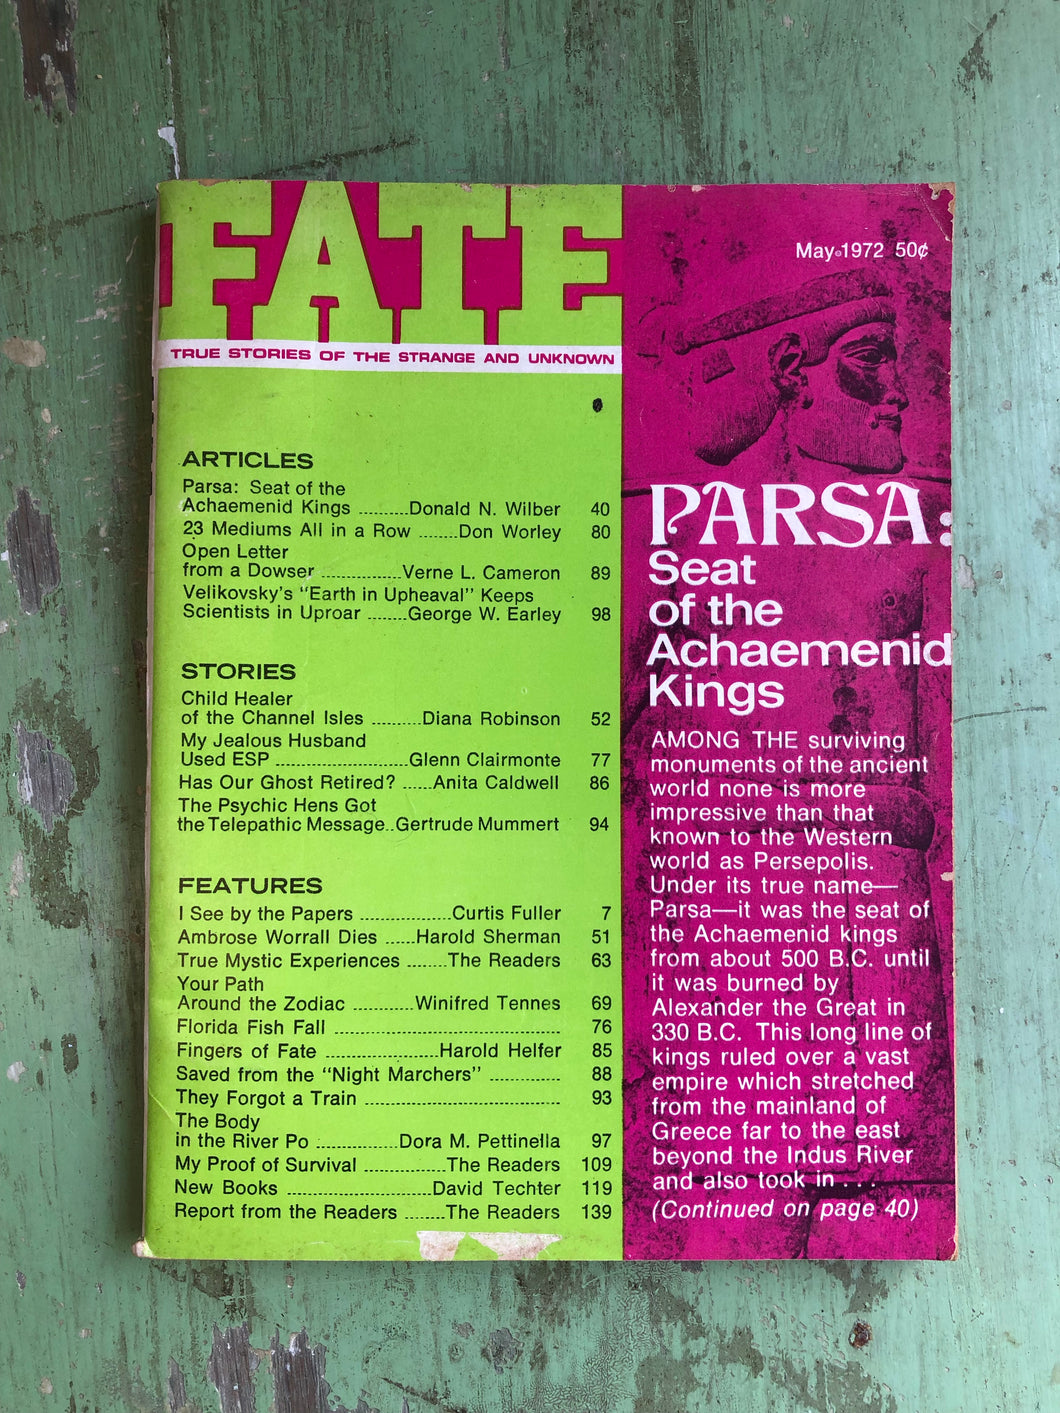 Fate: True Stories of the Strange and Unknown. May, 1972. Vol. 25 - No. 5, Issue No. 266